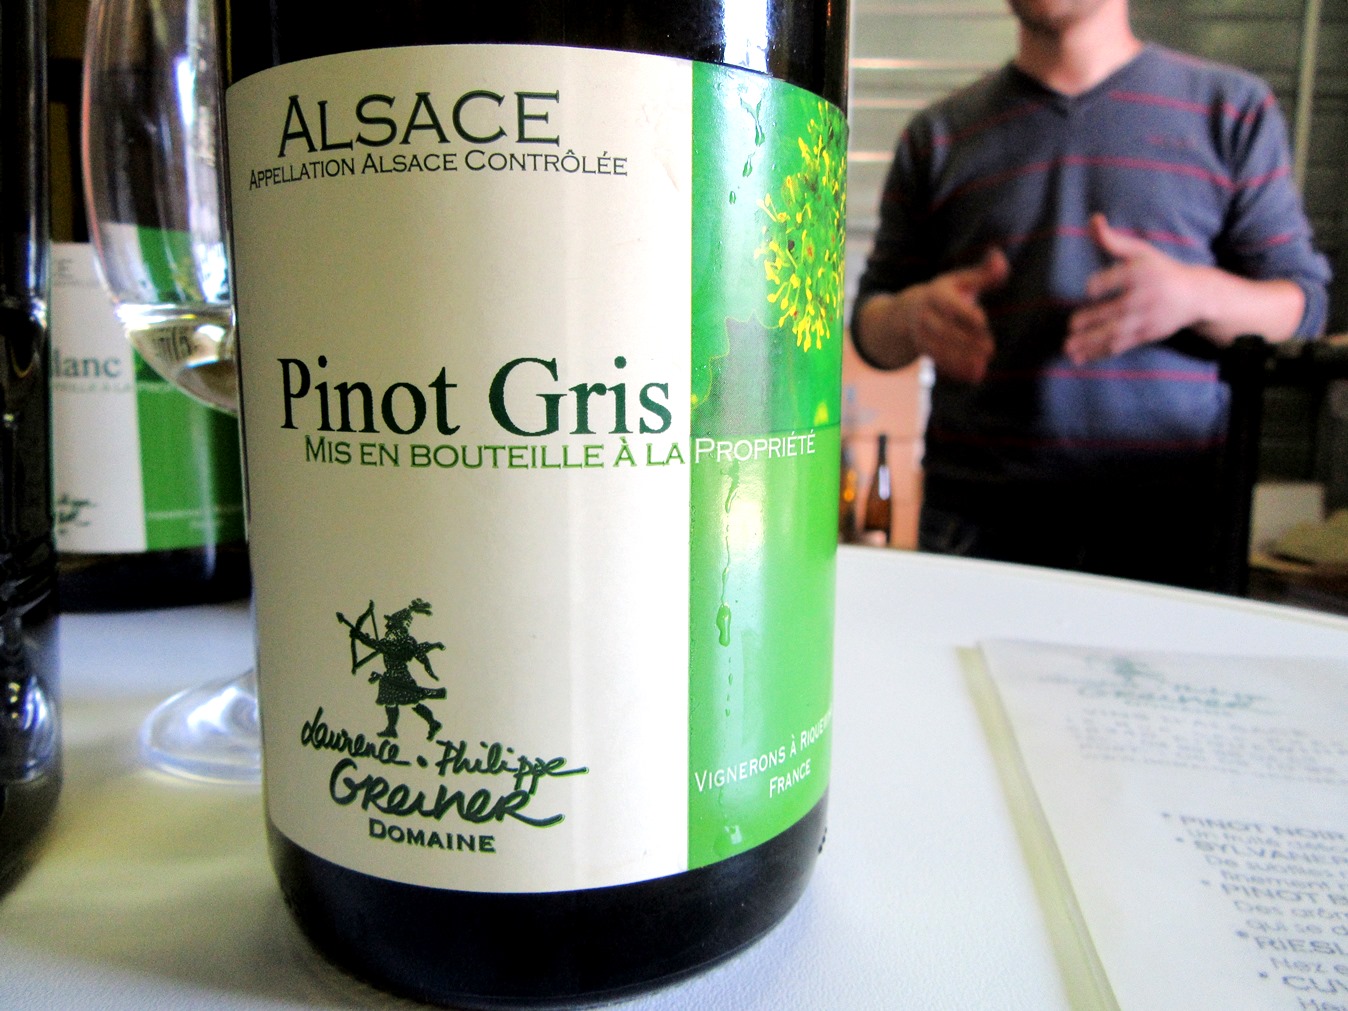 Domaine Laurence Phillipe Greiner, Pinot Gris 2015, Alsace, France